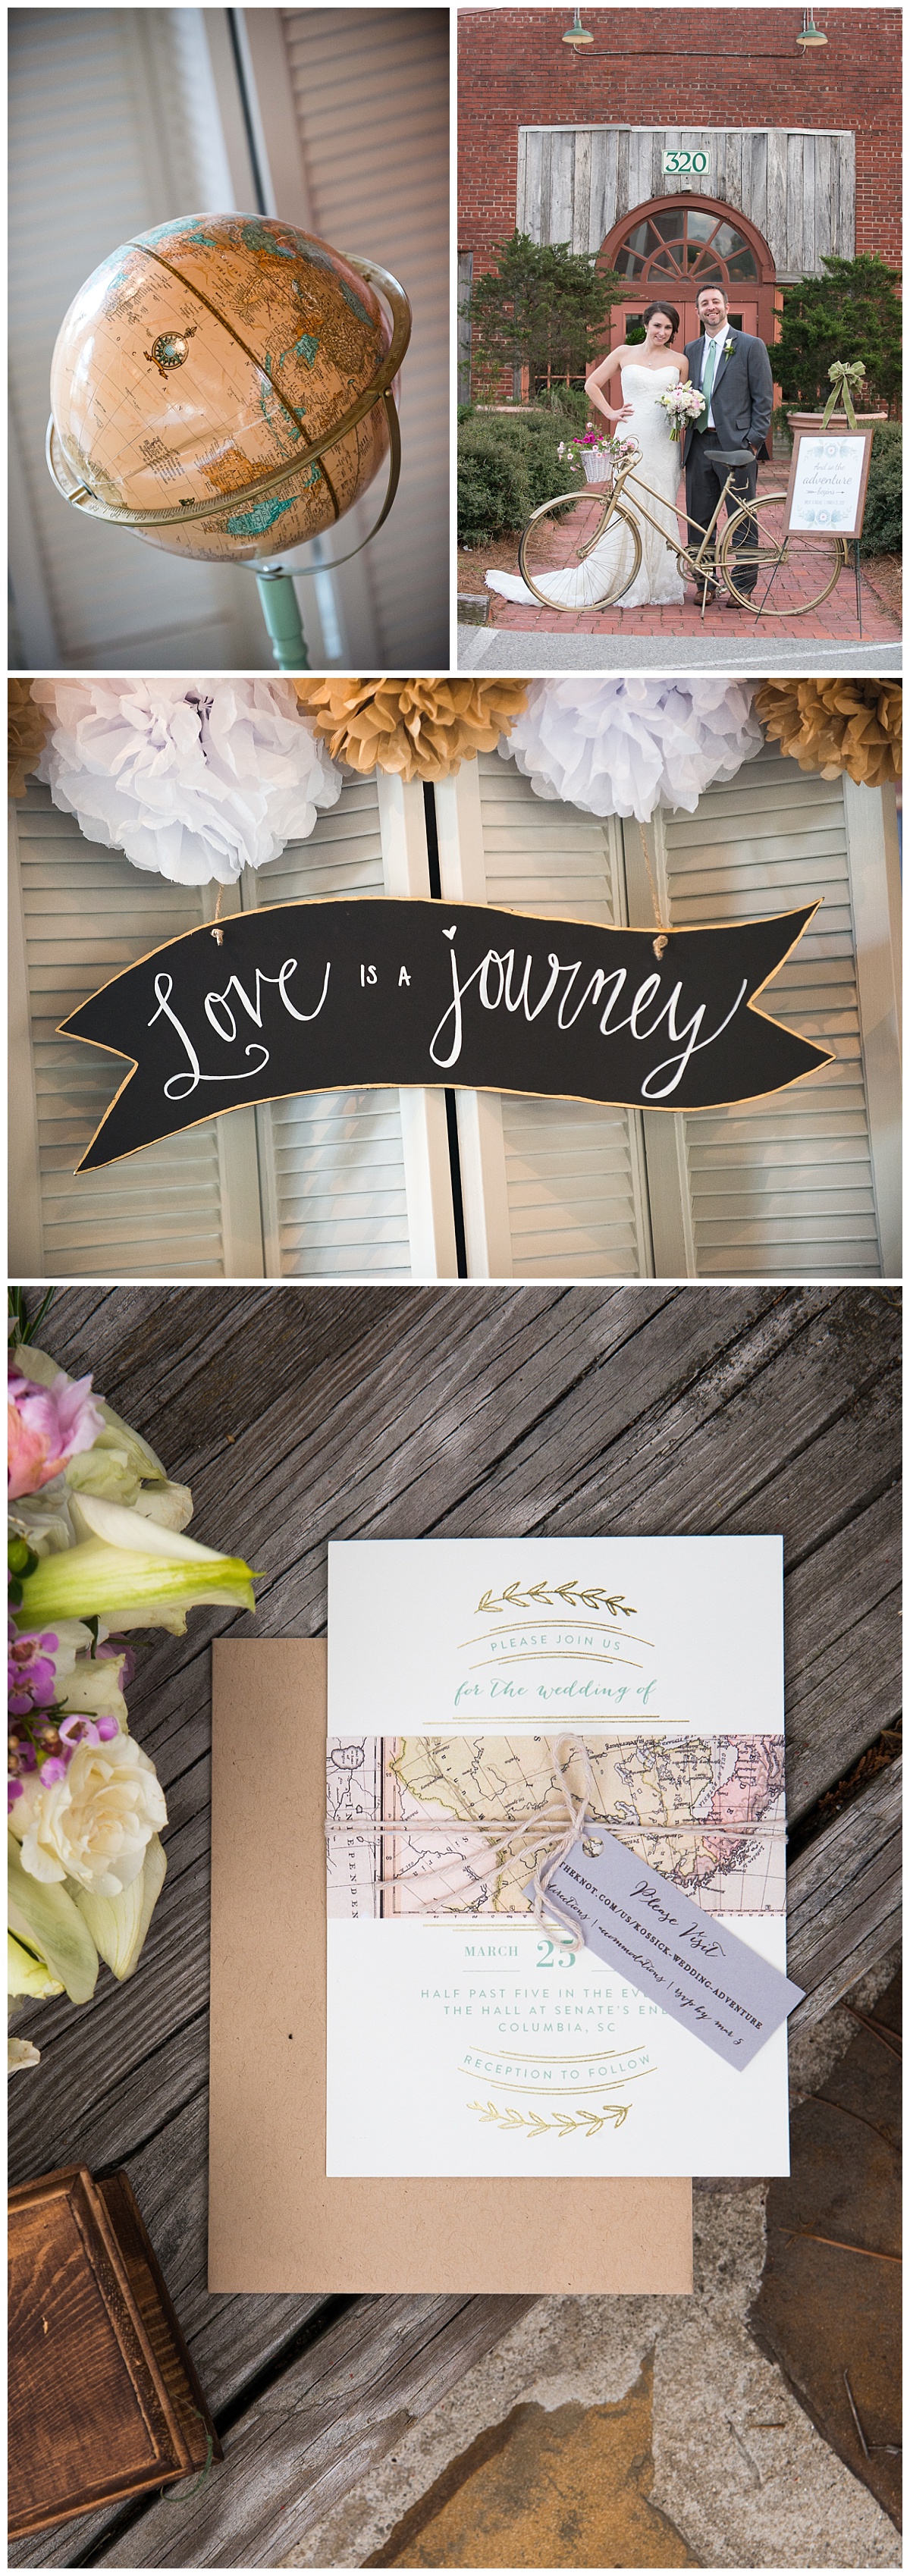 Rachel and Brent's love is a journey wedding theme at Senate's End